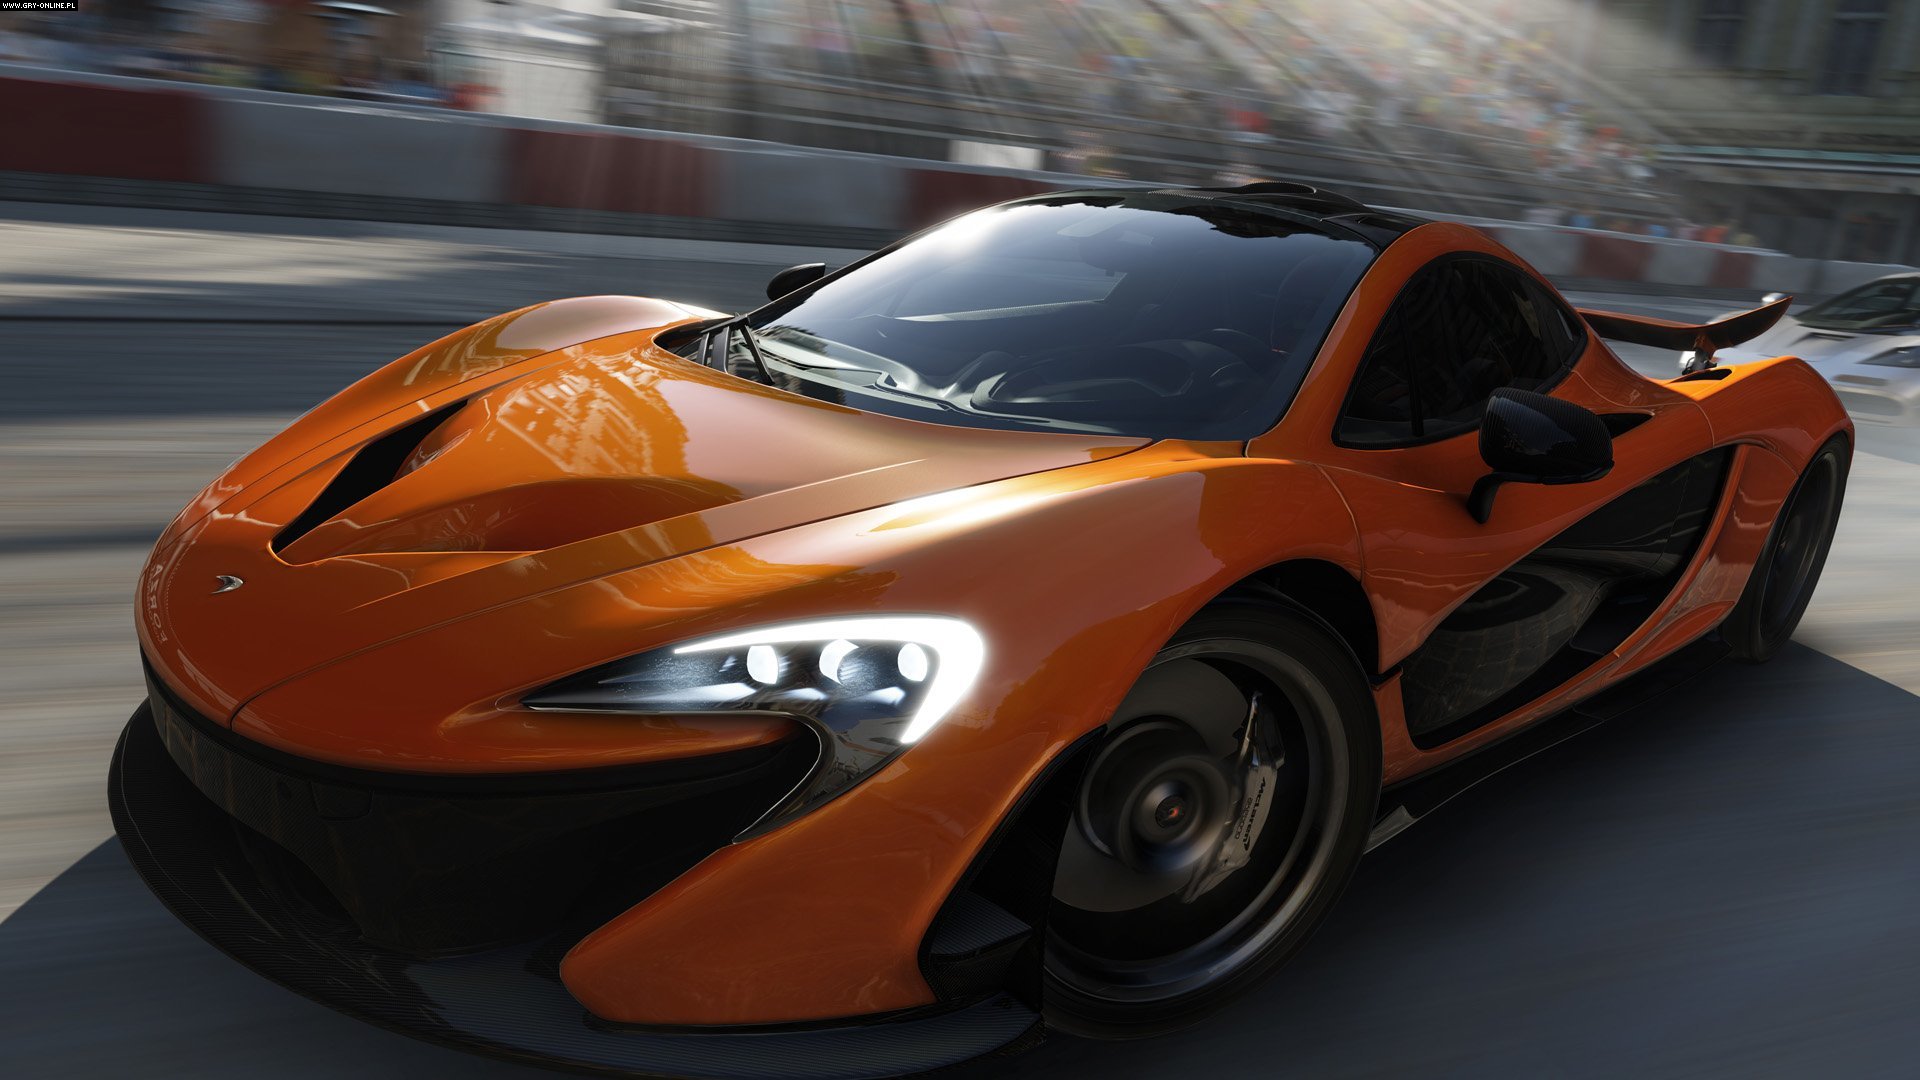 Video Game Forza Motorsport 5 1920x1080